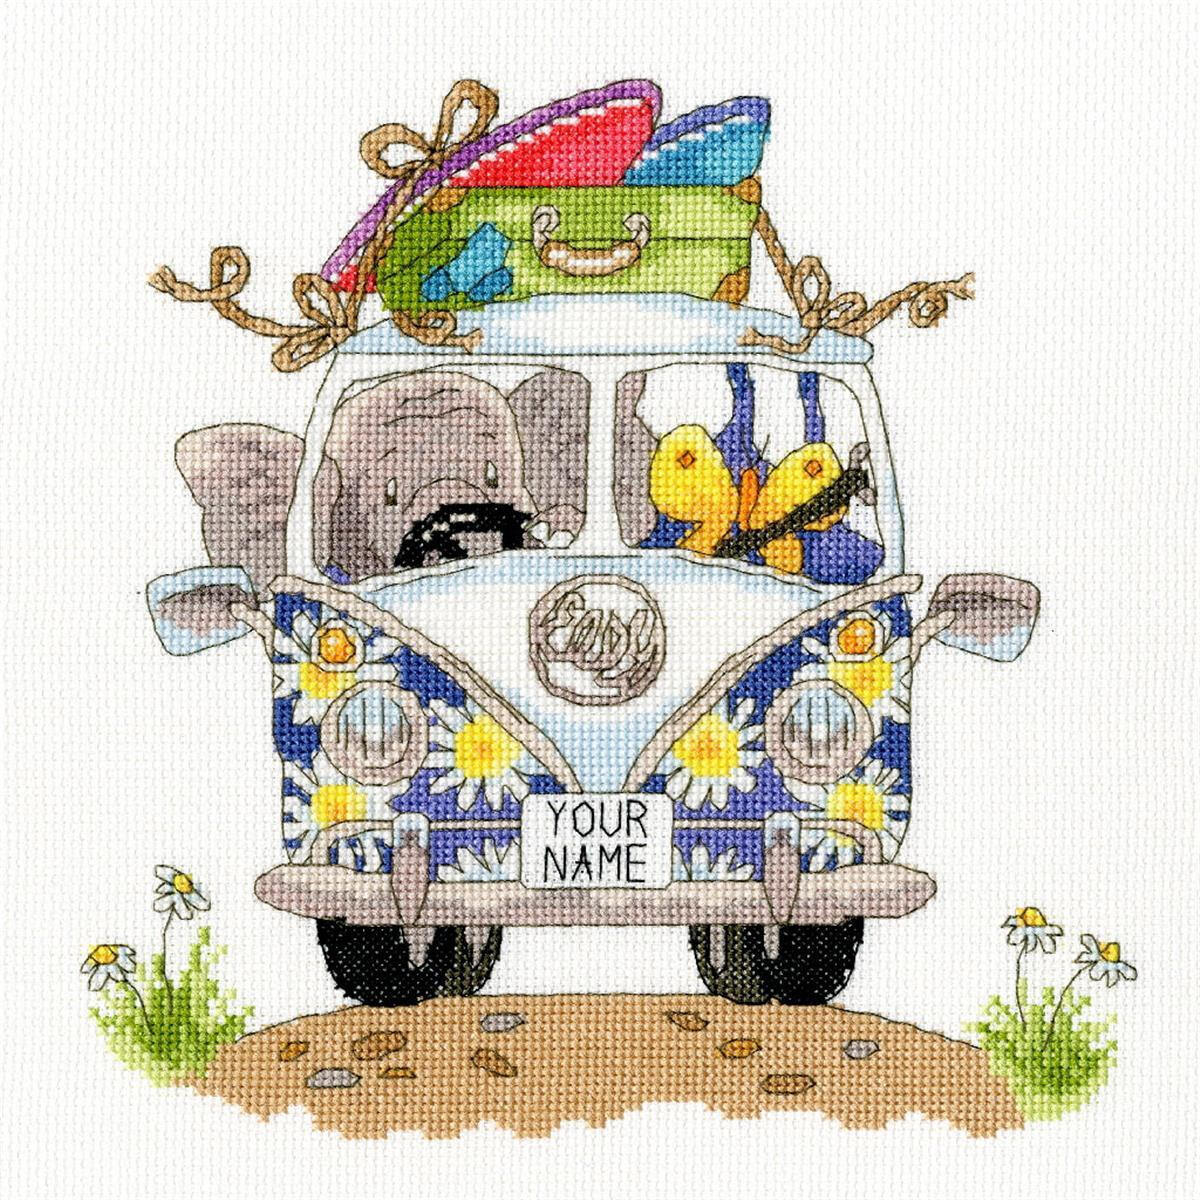 A colorful cross stitch embroidery design of a vintage...